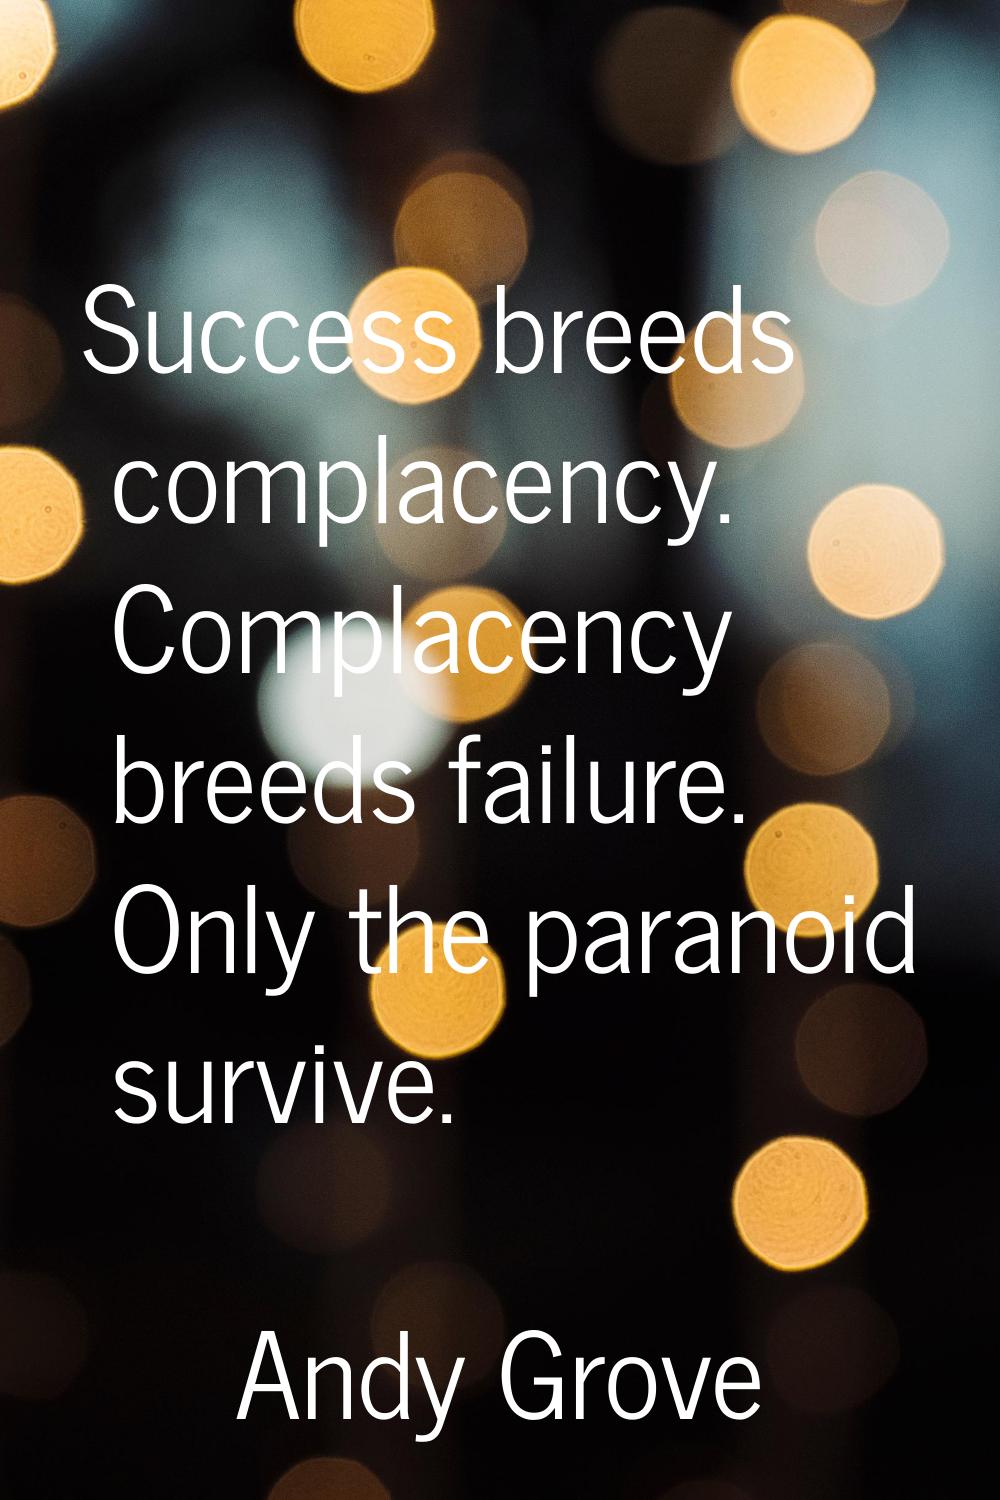 Success breeds complacency. Complacency breeds failure. Only the paranoid survive.